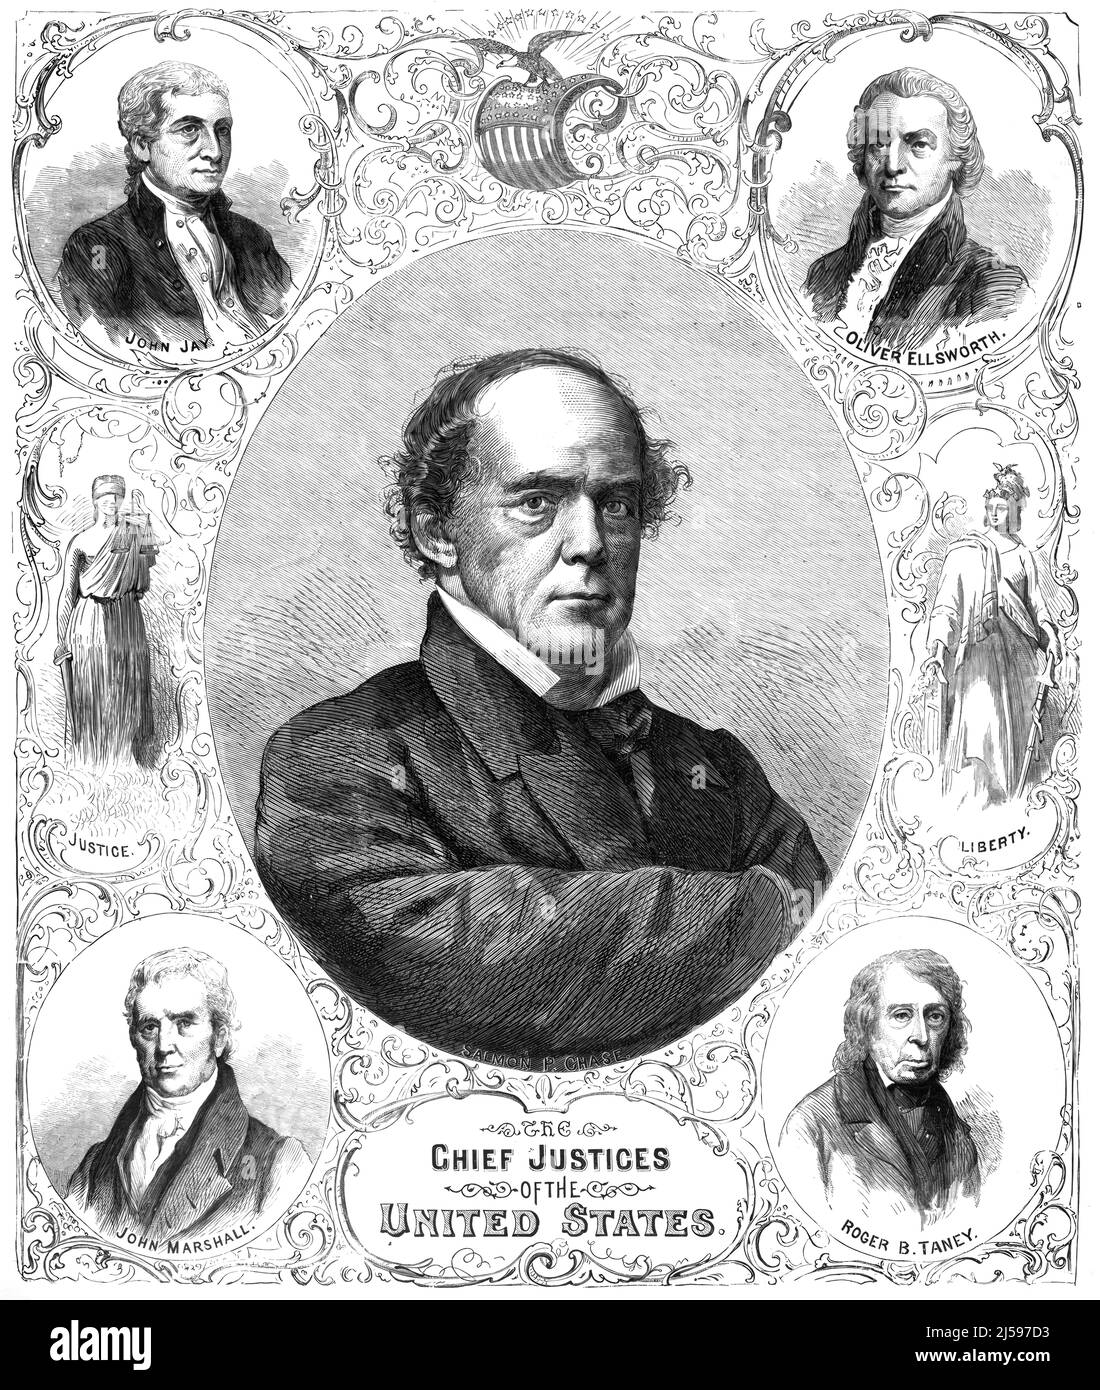 Portraits of the Chief Justices of the United States, Salmon Portland Chase, John Jay, Oliver Ellsworth, John Marshall. 19th century illustration Stock Photo